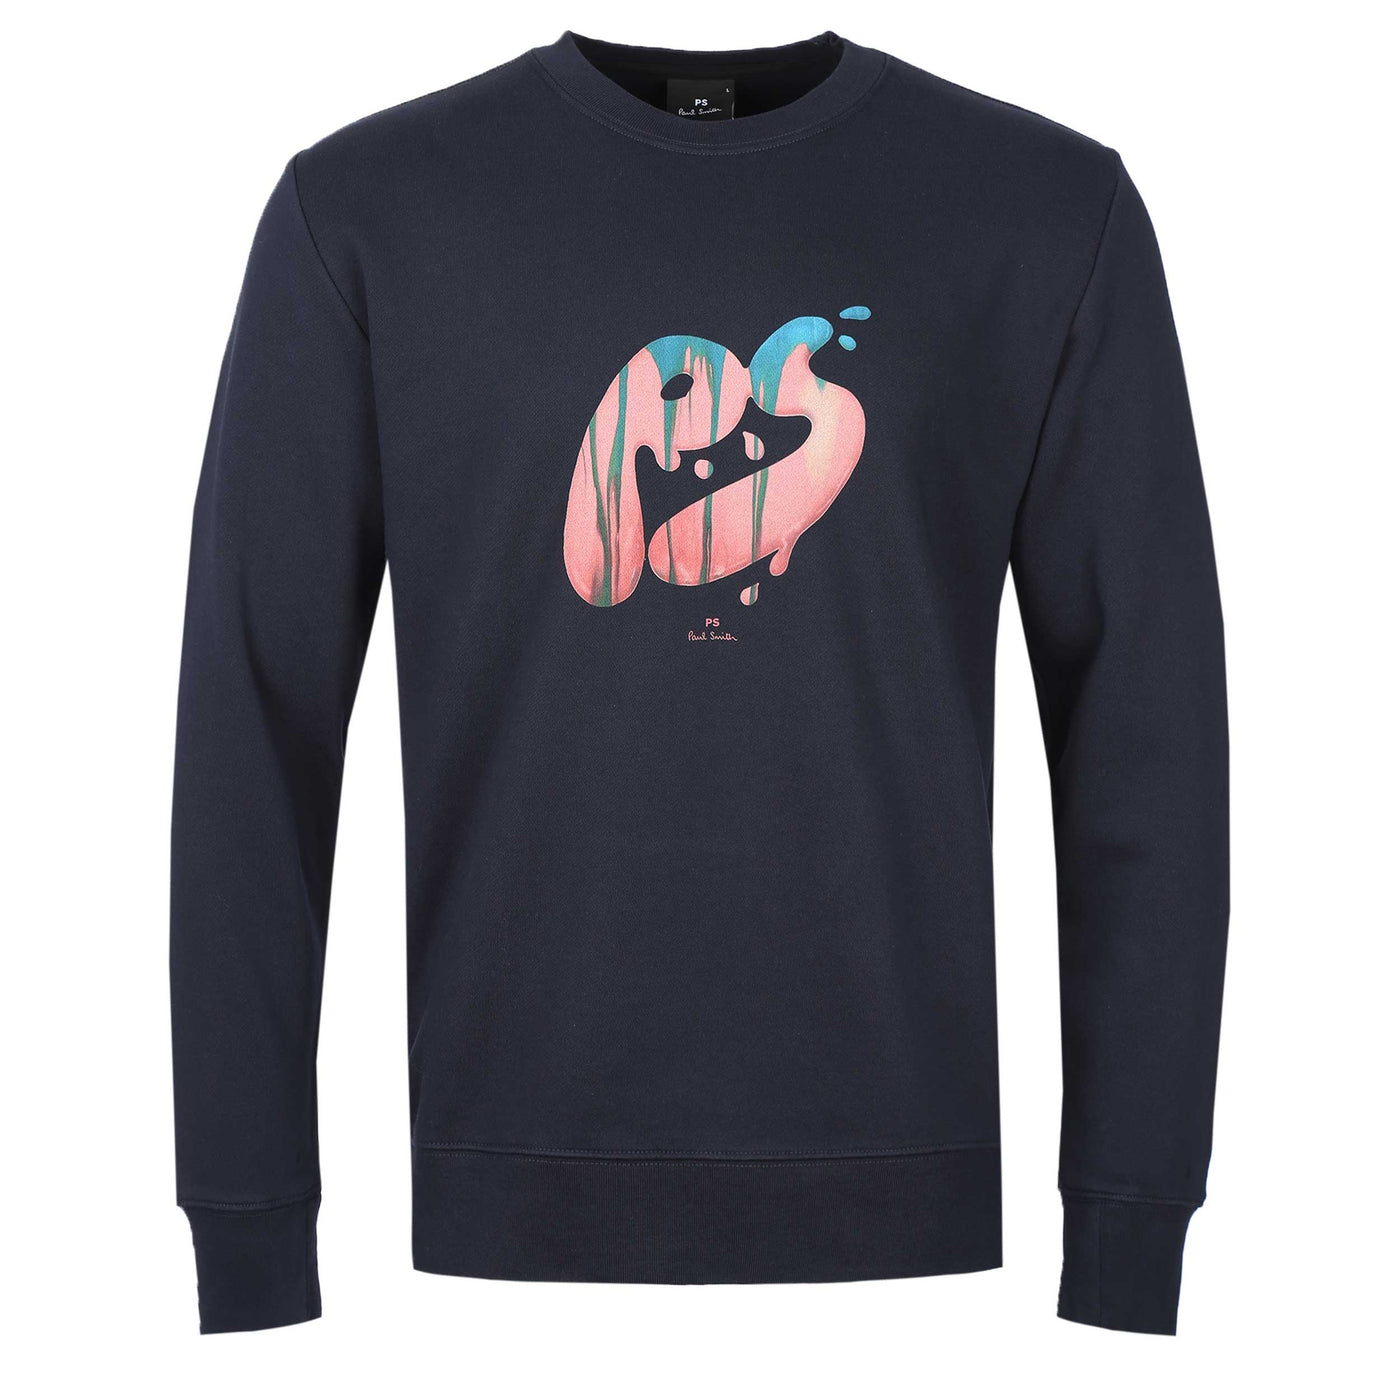 Paul Smith PS Drip Sweat Top in Navy